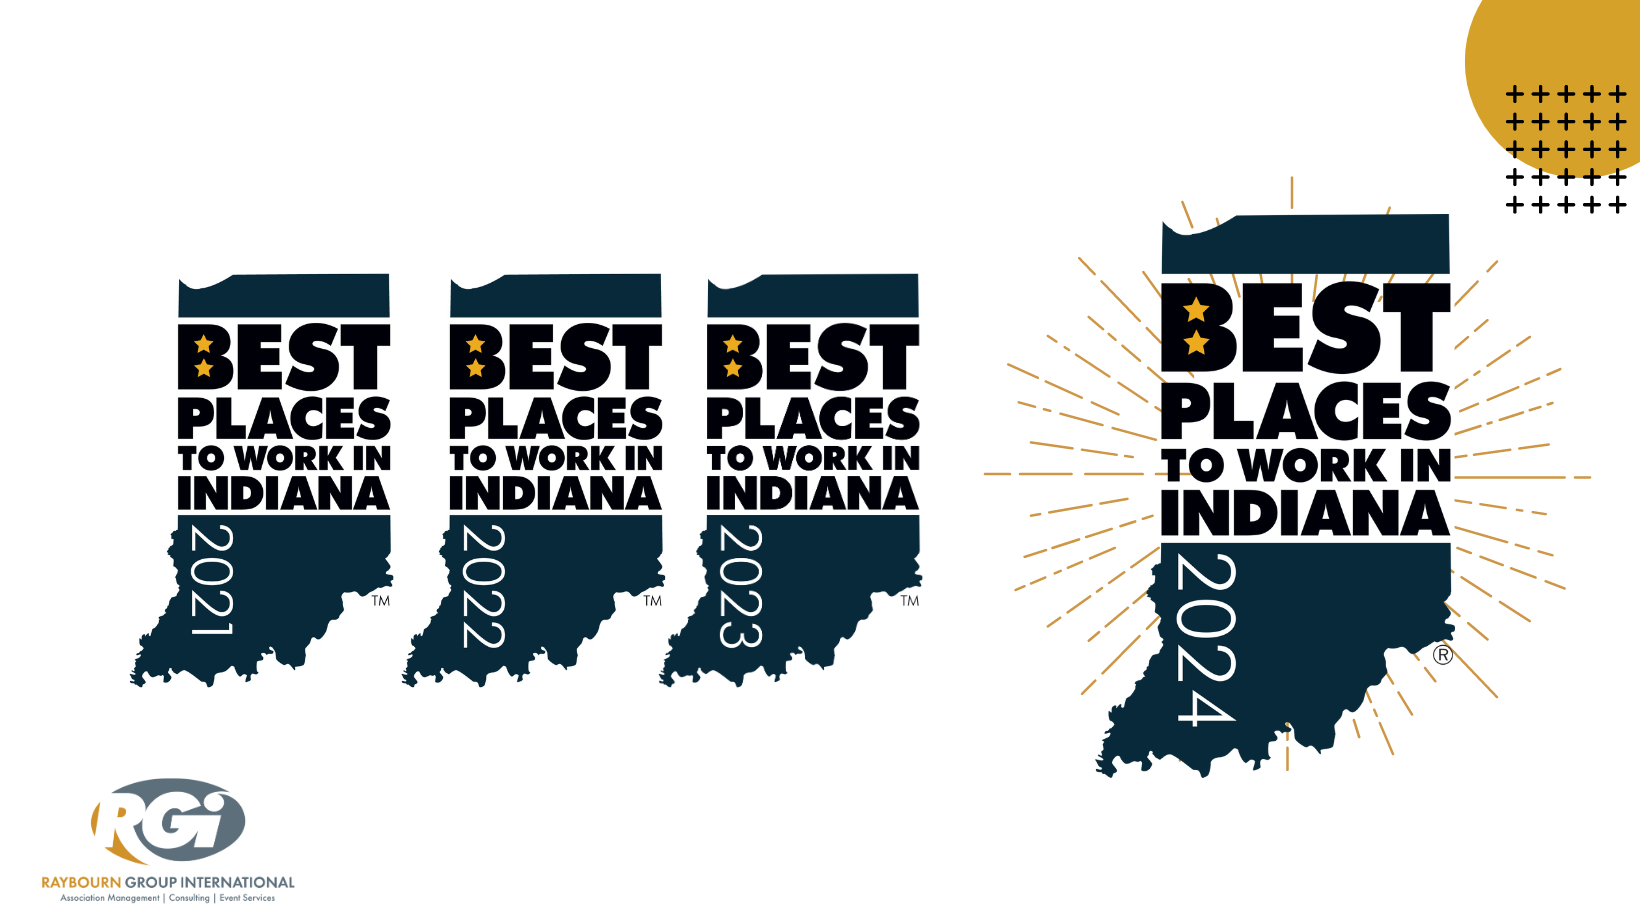 Raybourn Group International (RGI) with tagline Association Management | Consulting | Event Services Logo next to Best Places to Work in Indiana 2024 logo in the shape of the state of Indiana. Orange circle graphics in corners